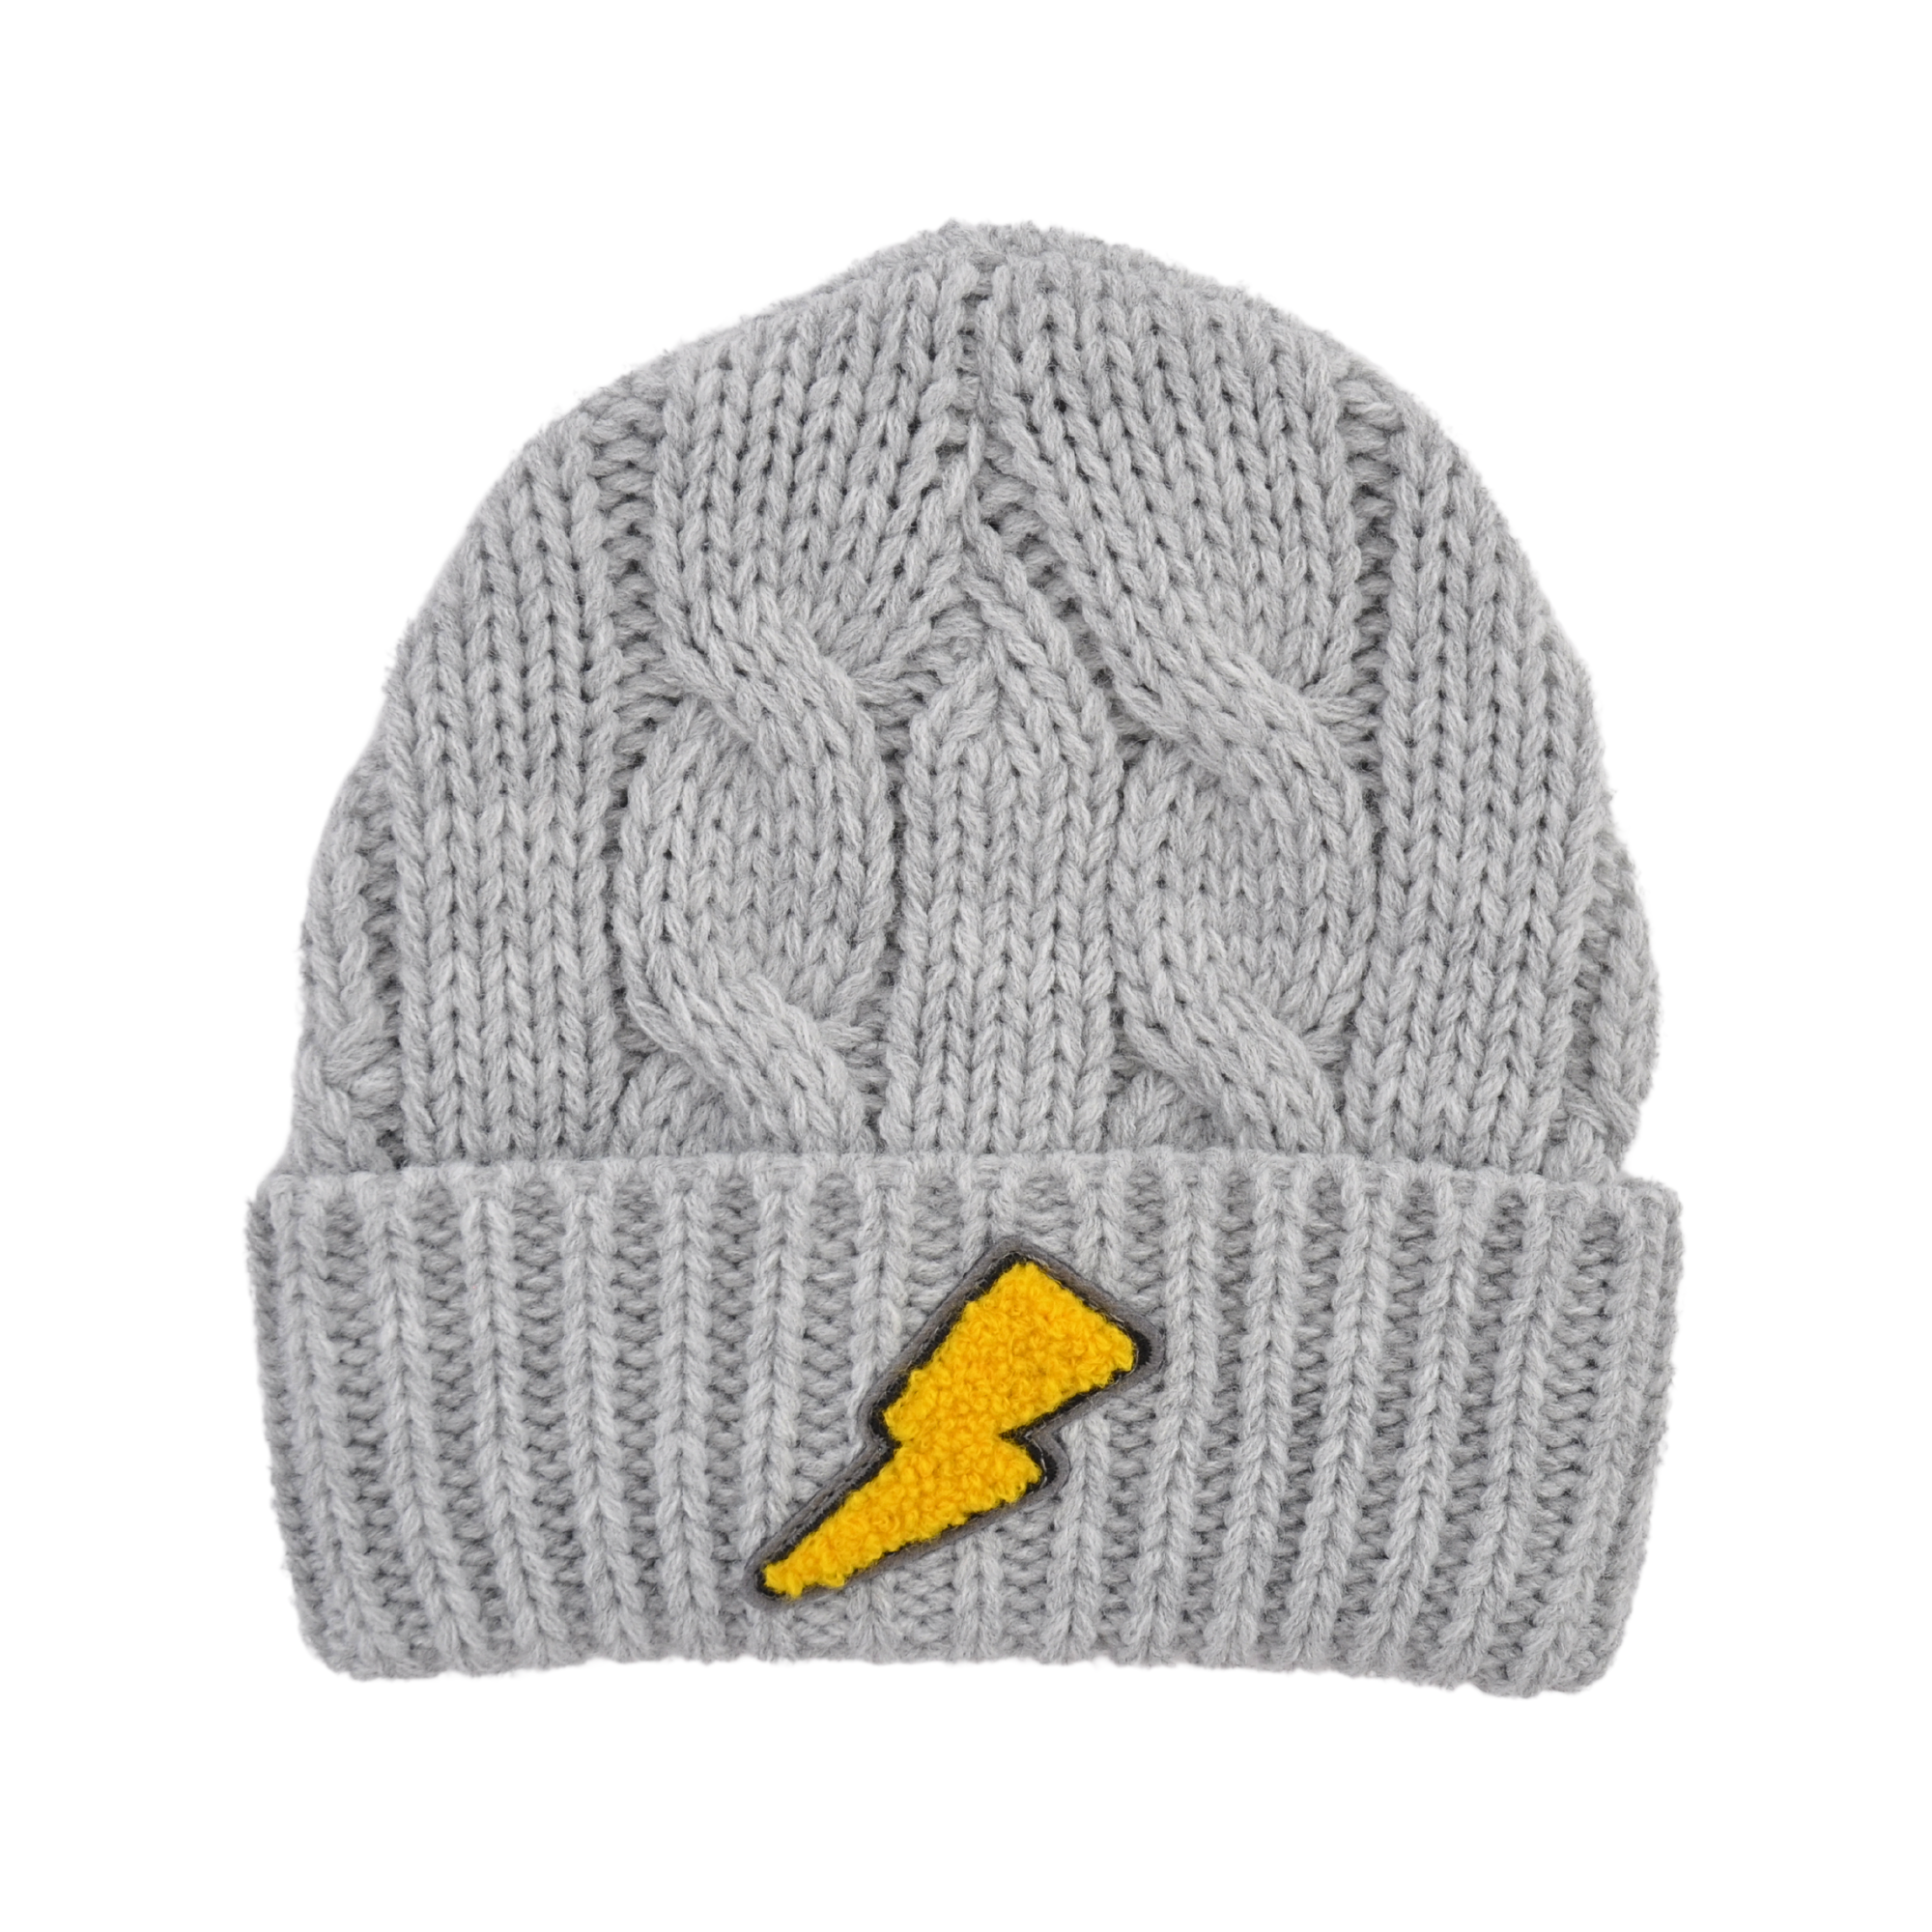 Winter Beanie - Cable Fisherman Grey Bolt